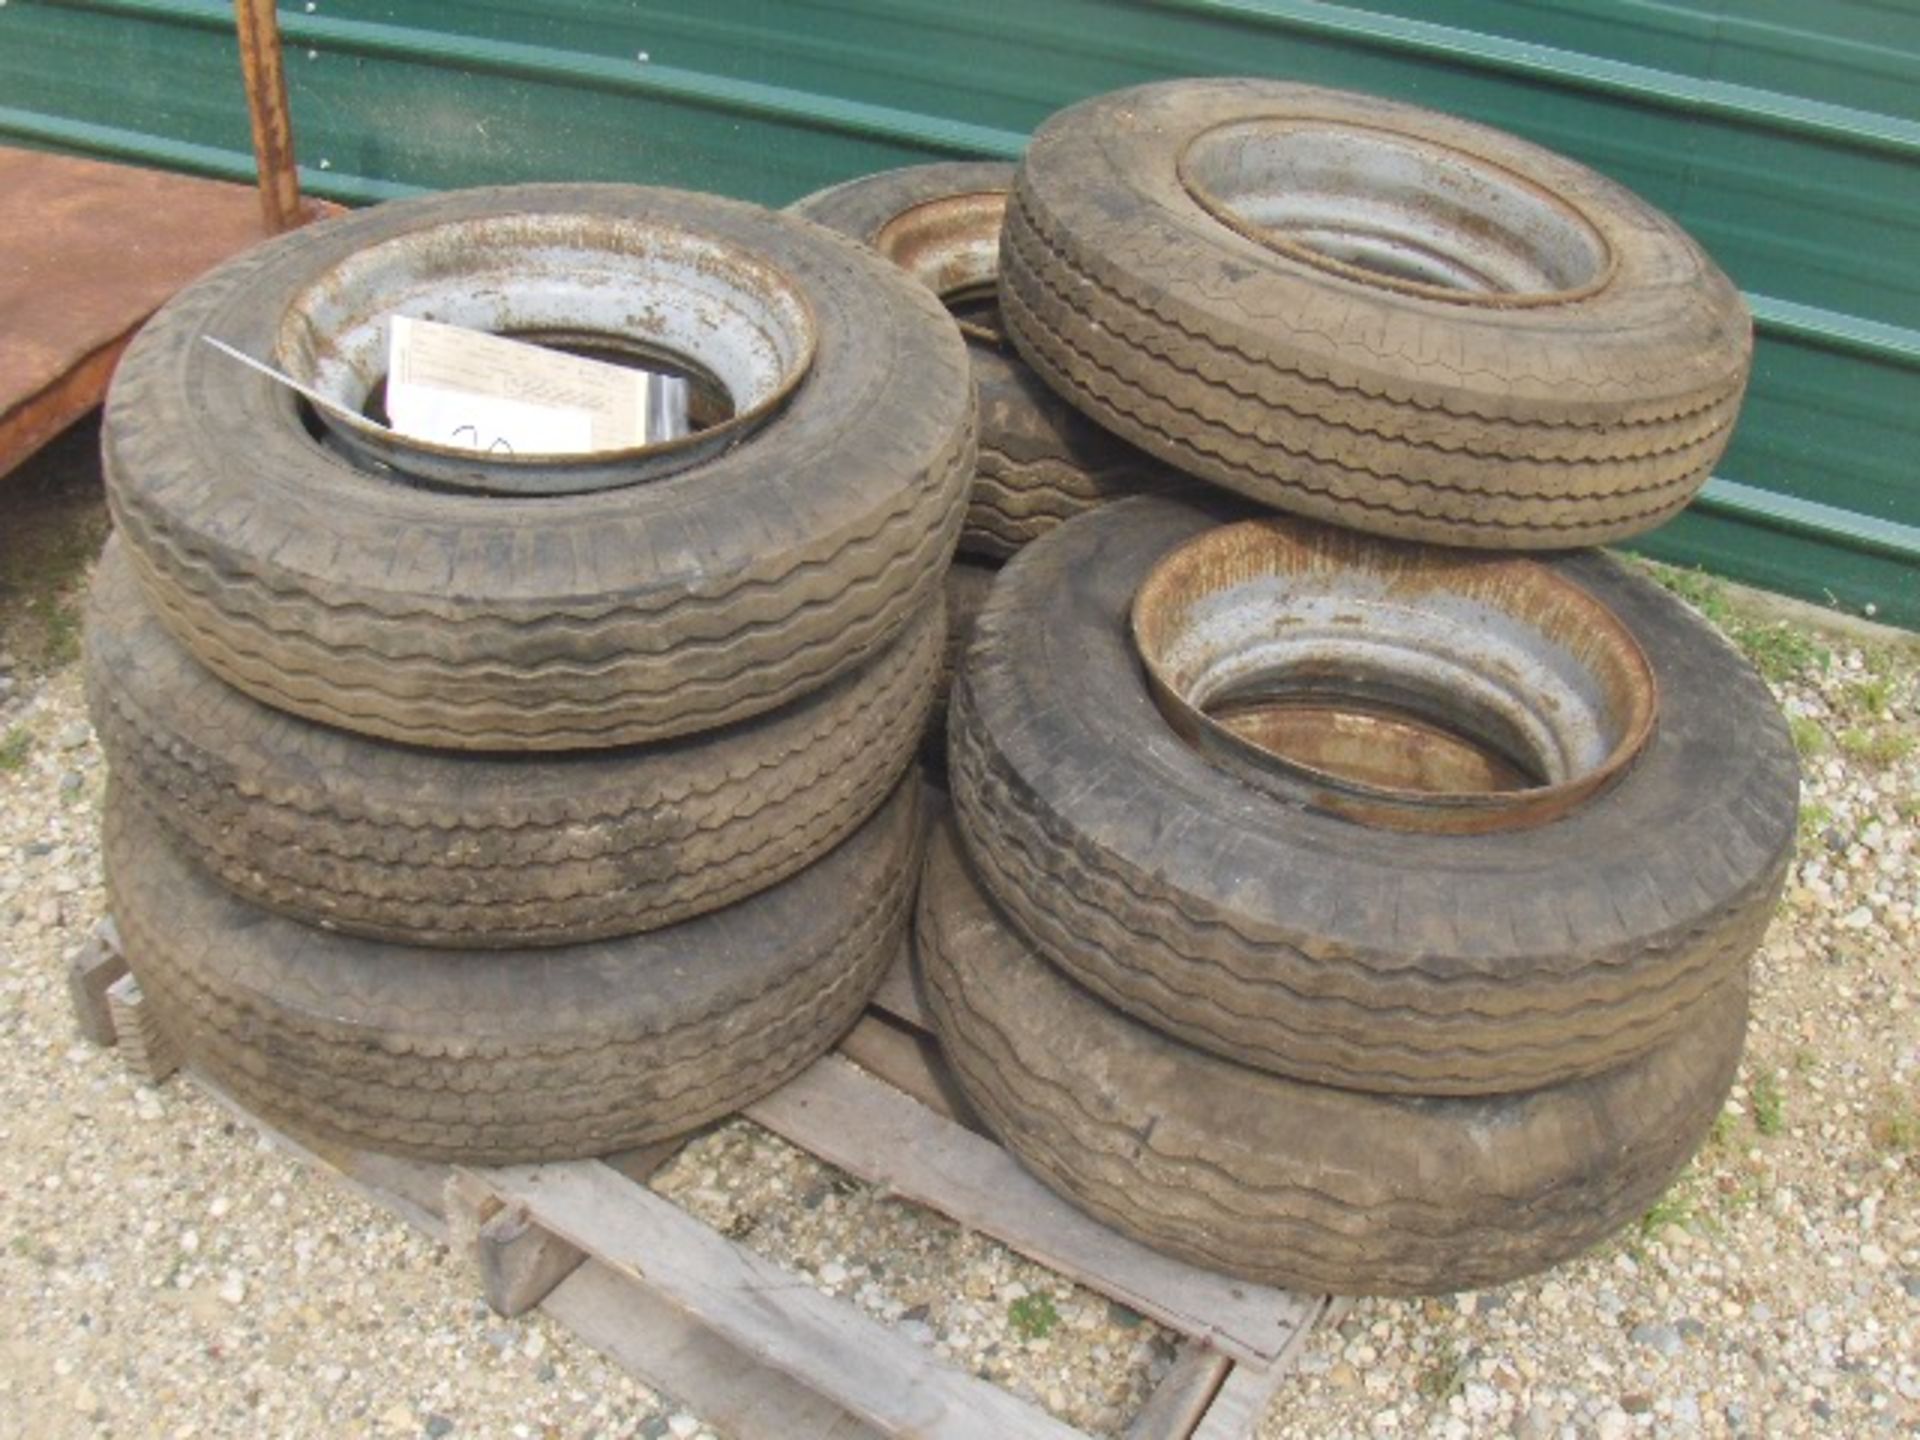 8 Tires, sold with a bill of sale only